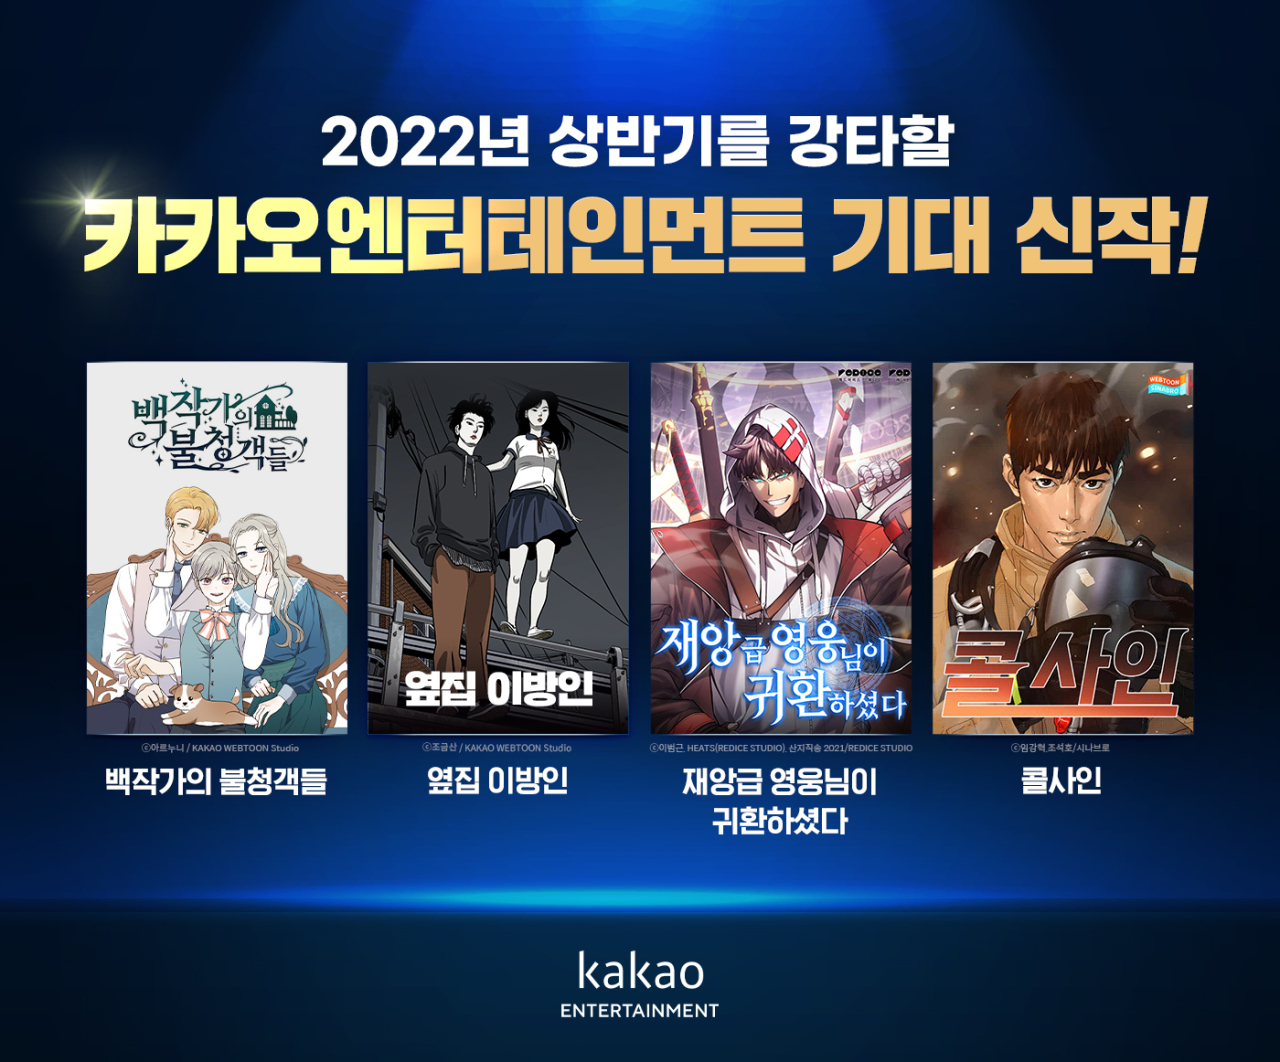 From left: The cover images of four webtoons, “The Unwelcome Guests of House Fildette,” “Strange Neighbor” (unofficial translation), “Return of the Disastrous Hero” (working title) and “Call Sign” (Kakao Entertainment)